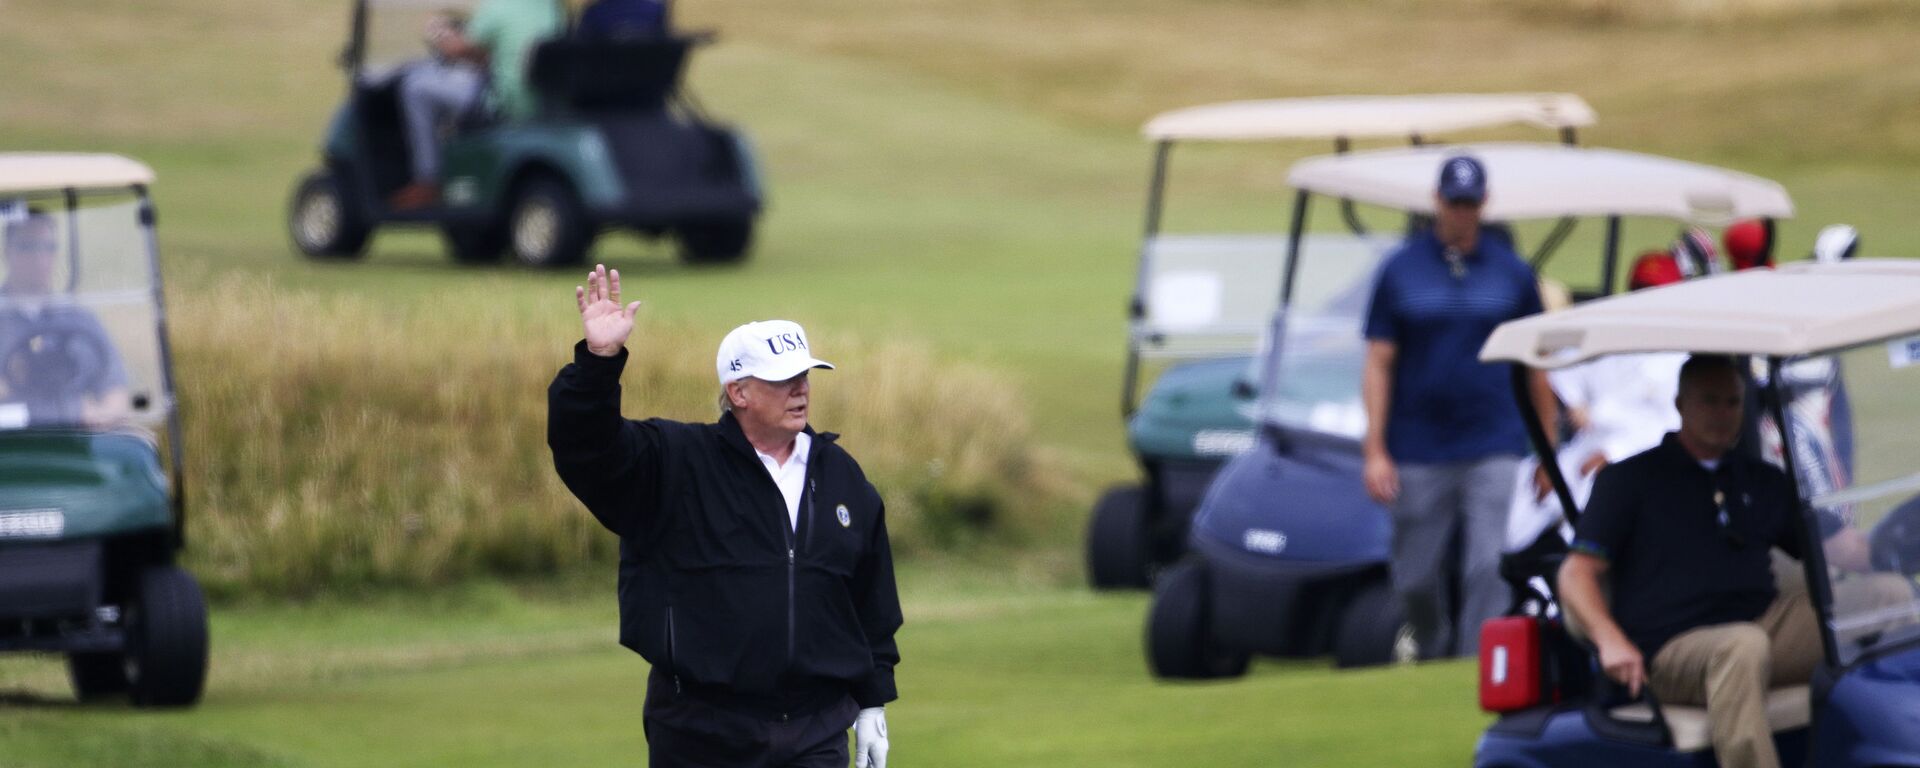 FILE - In this July 14, 2018 file photo, President Donald Trump waves to protesters while playing golf at Turnberry golf club, in Turnberry, Scotland - Sputnik International, 1920, 16.02.2023